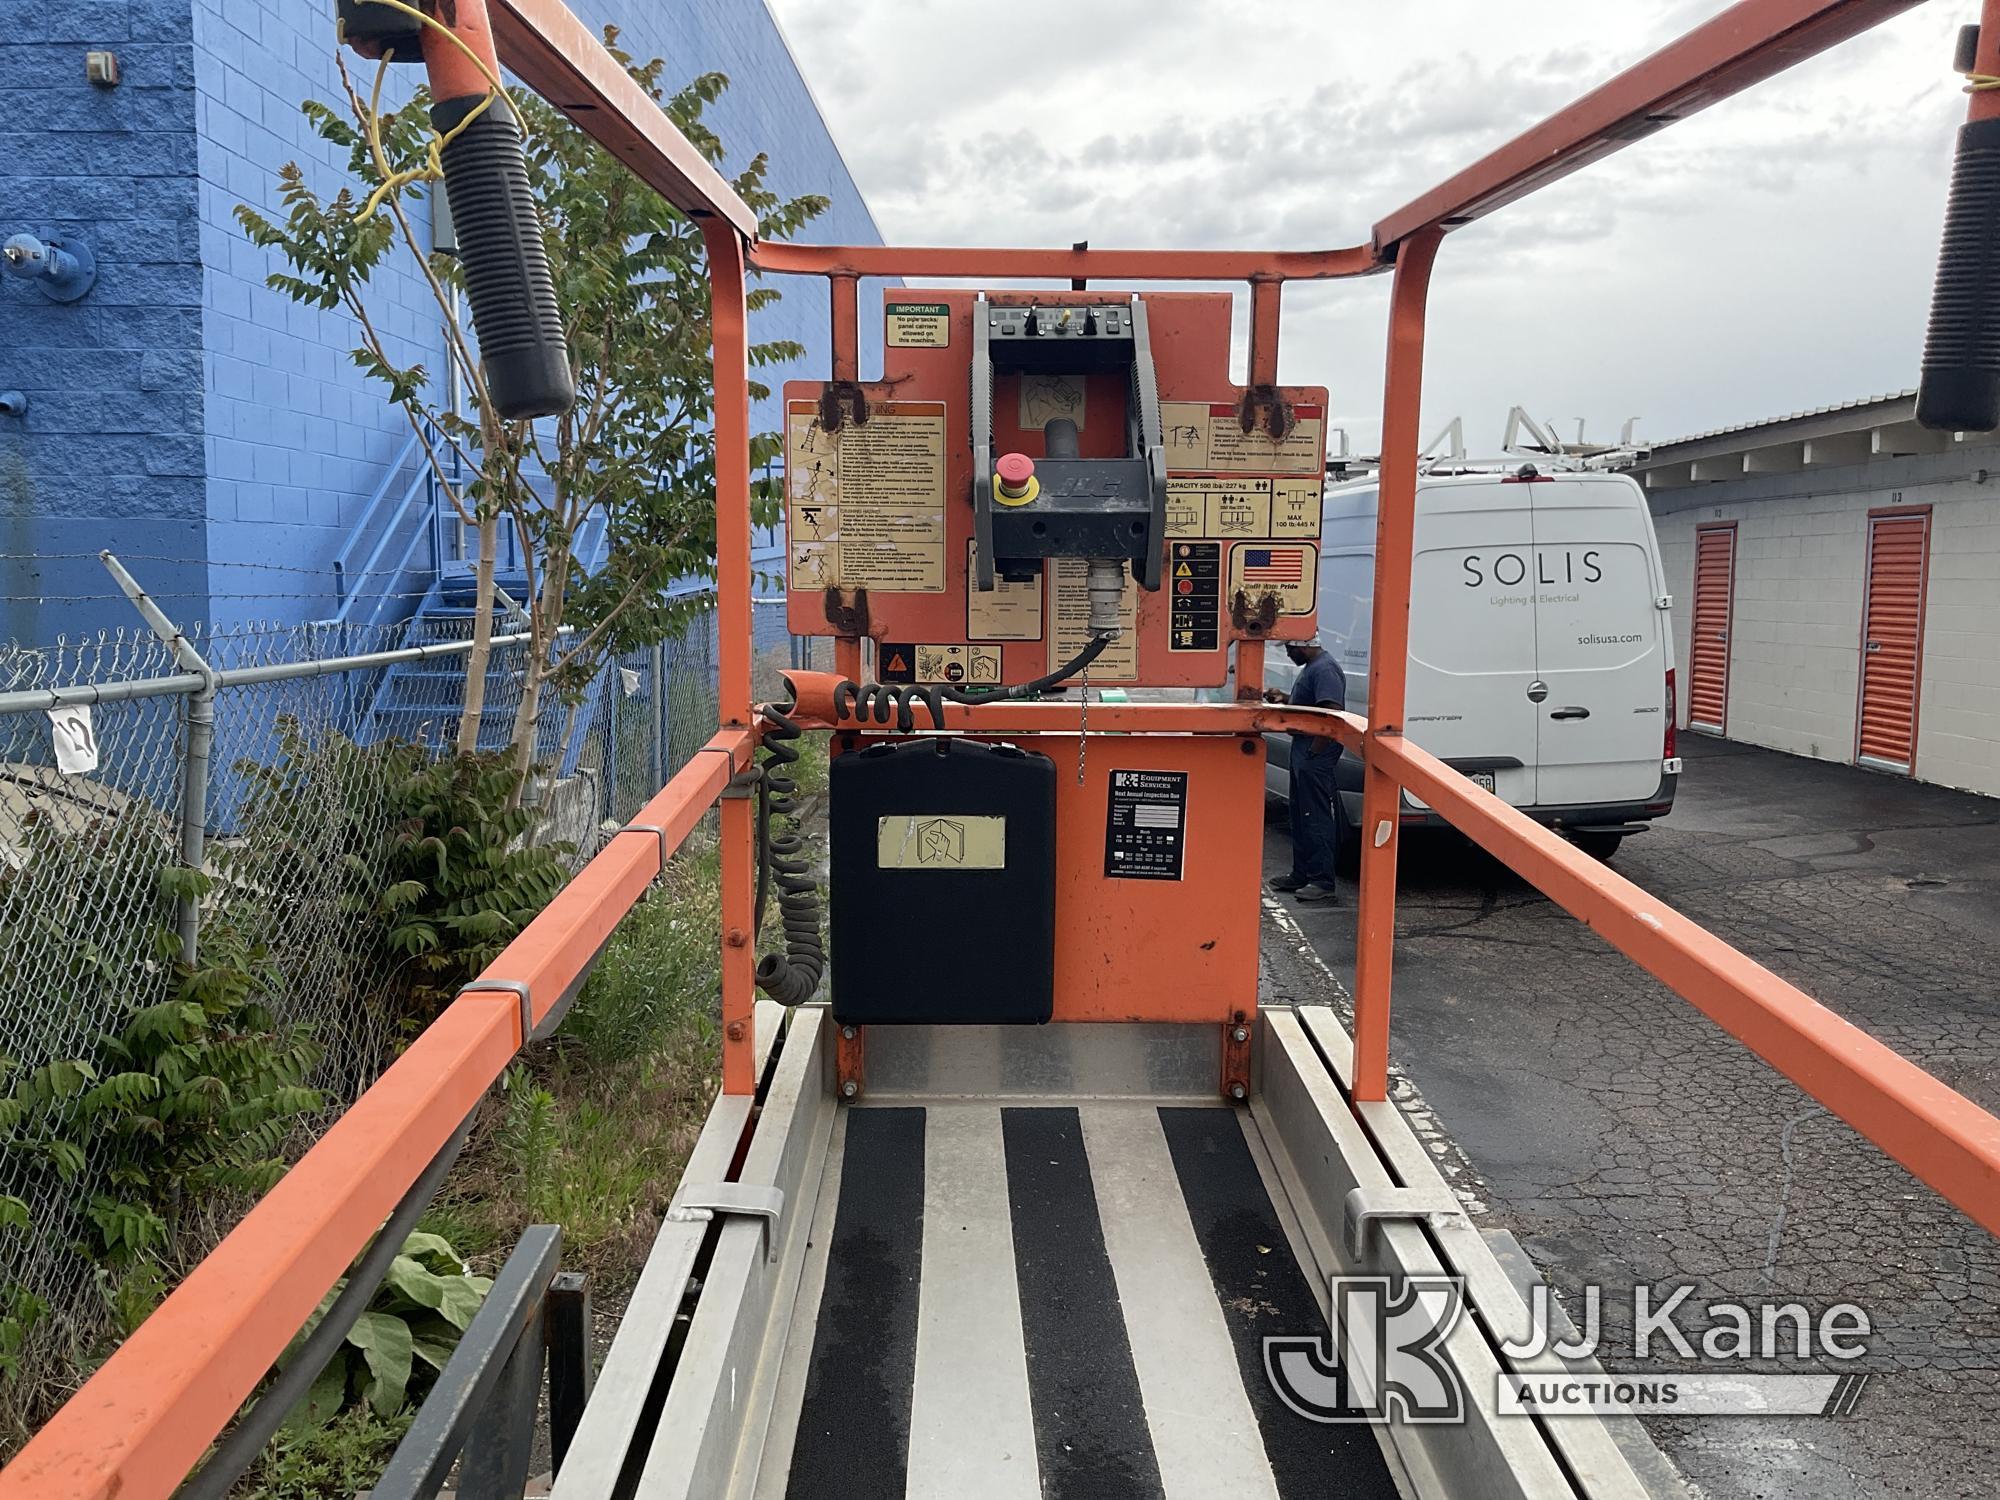 (Thornton, CO) 2008 JLG 1930 Self-Propelled Scissor Lift, to be sold with ID# 1355882 Runs & Operate